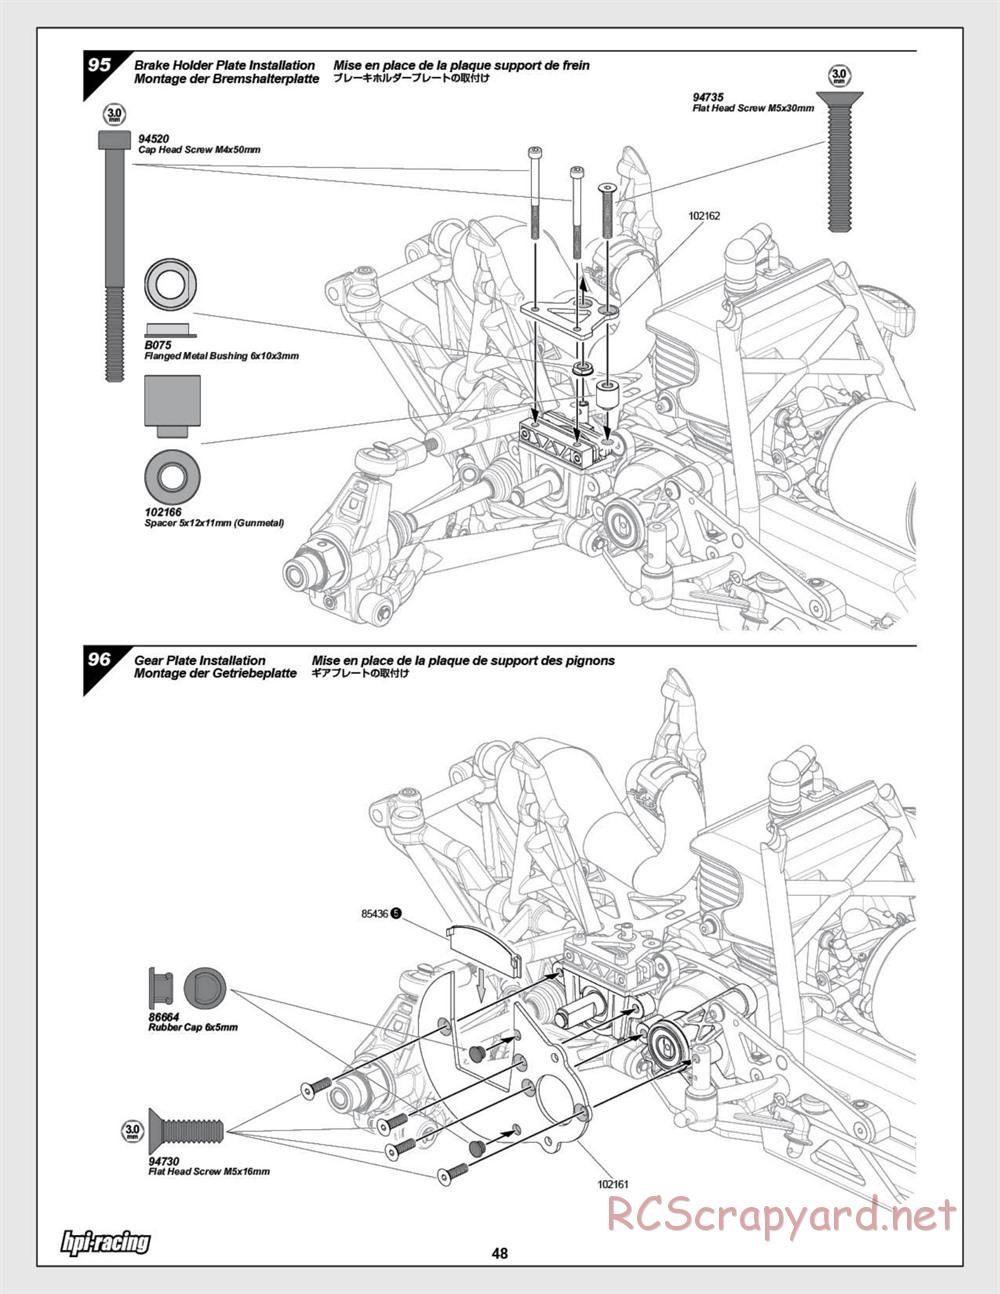 HPI - Baja 5SC SS - Exploded View - Page 48